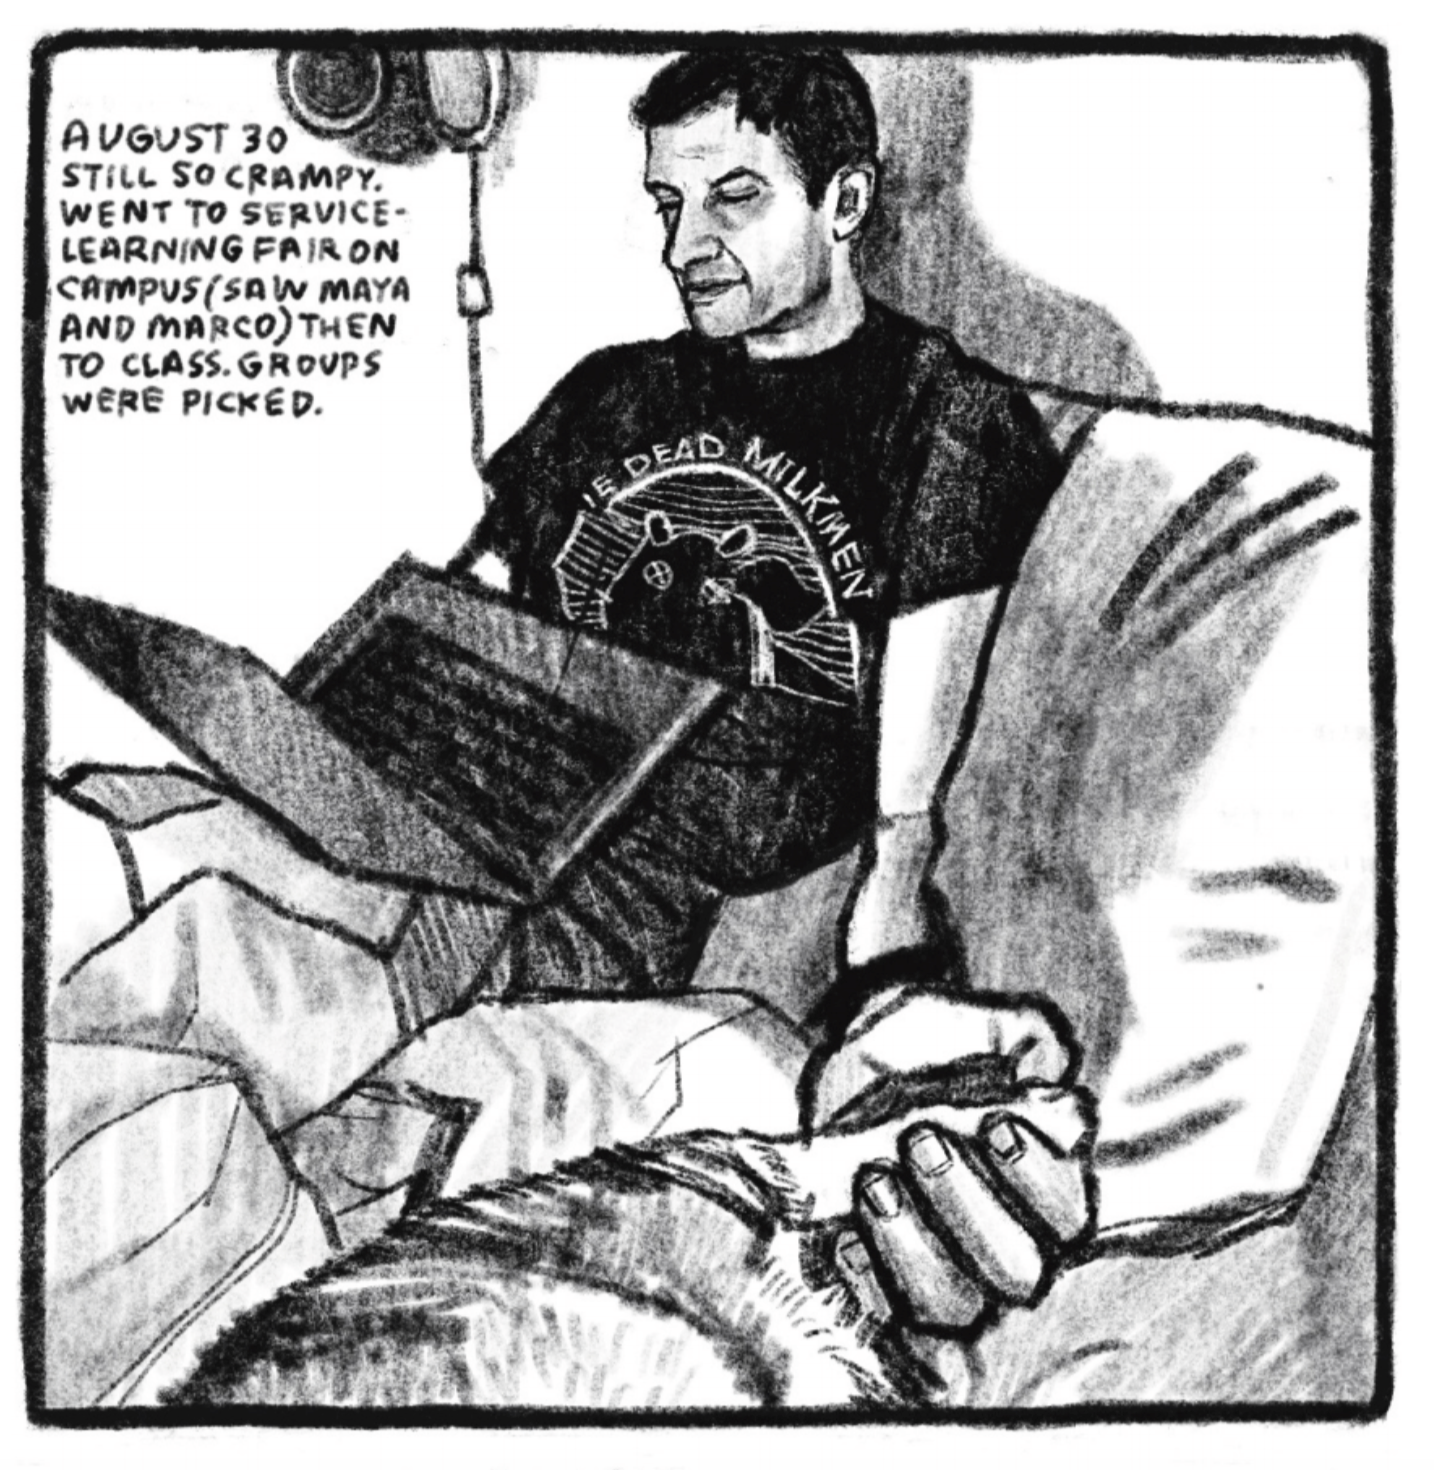 Tony is sitting up and reading on his laptop in bed. He wears a graphic â€˜The Dead Milkmenâ€™ band tee. He is holding one of Tonkâ€™s paws gently in his left hand. â€œAugust 30. Still so crampy. Went to service-learning fair on campus (saw Maya and Marco) then to class. Groups were picked.â€